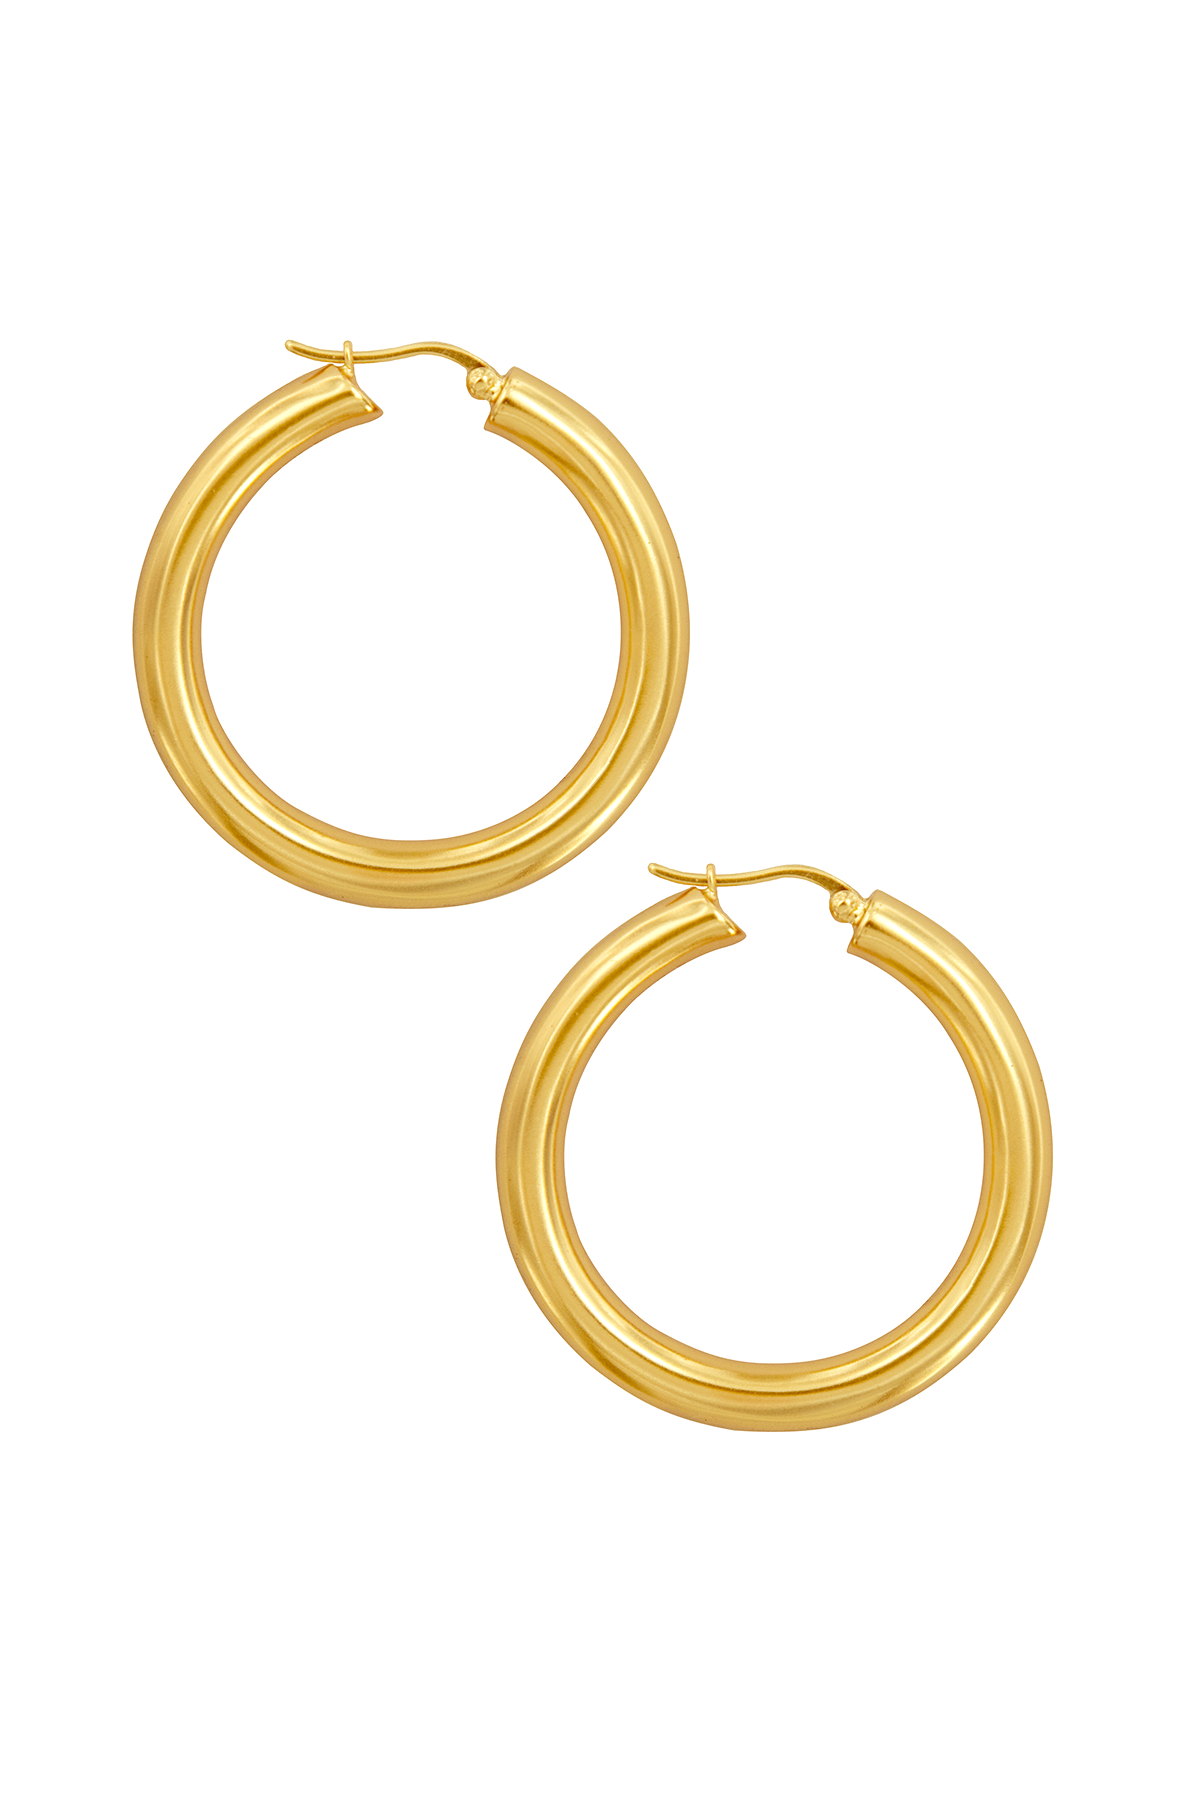 View of Pyar Jupiter Gold Hinged Hoop Earrings, available on ZERRIN with free shipping in Singapore